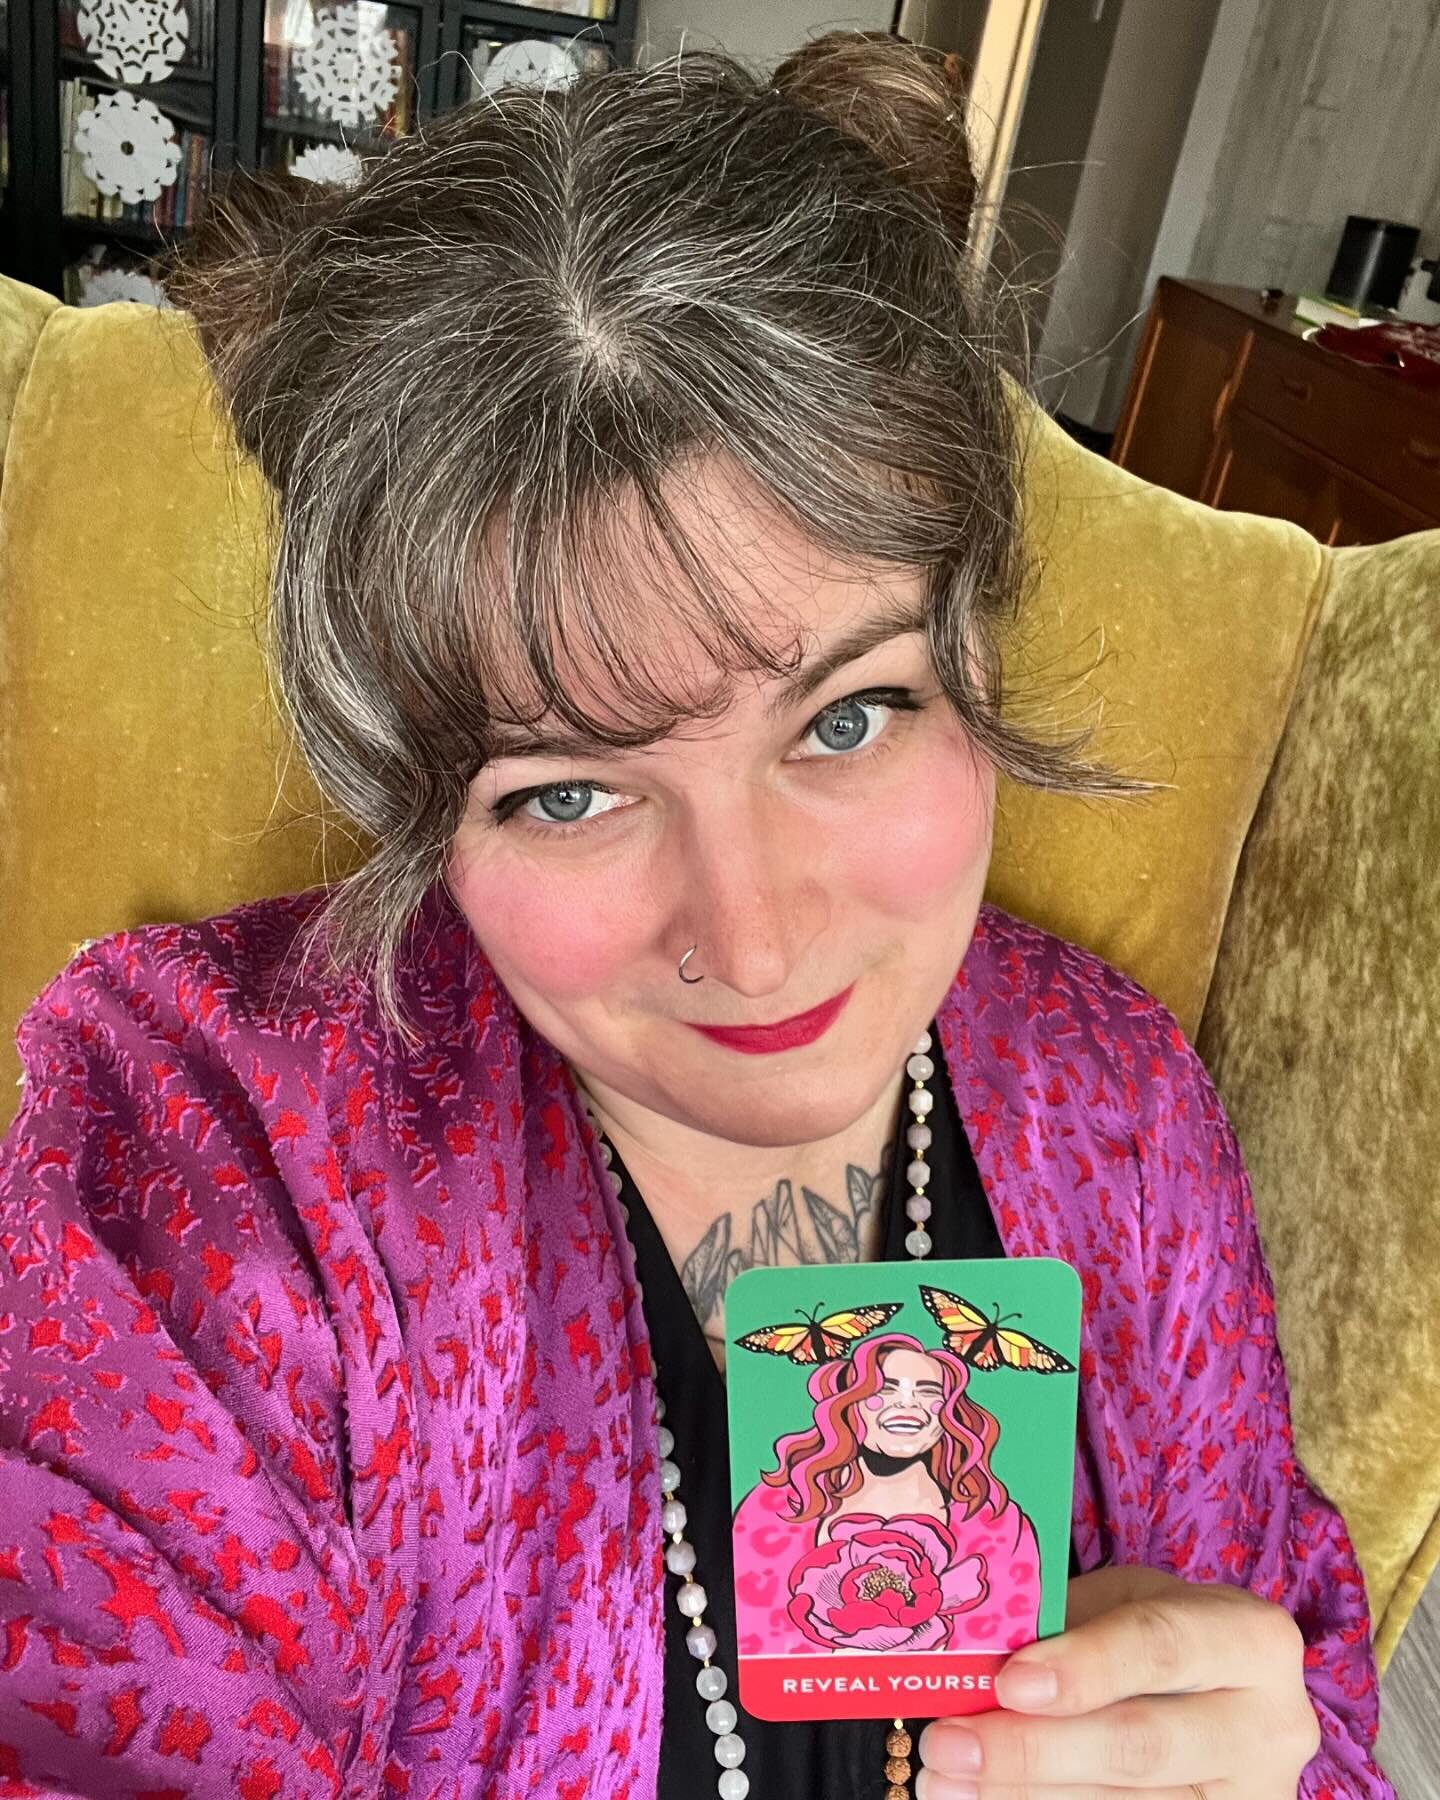 Look Mom, I&rsquo;m an oracle card! ✨

Last year my friend @sassylisalister asked me if she could turn me into SHE Art&hellip;her pop art soul essence portraits. Of course I said, &ldquo;Yes!&rdquo; and was thrilled that she wanted to include it in h